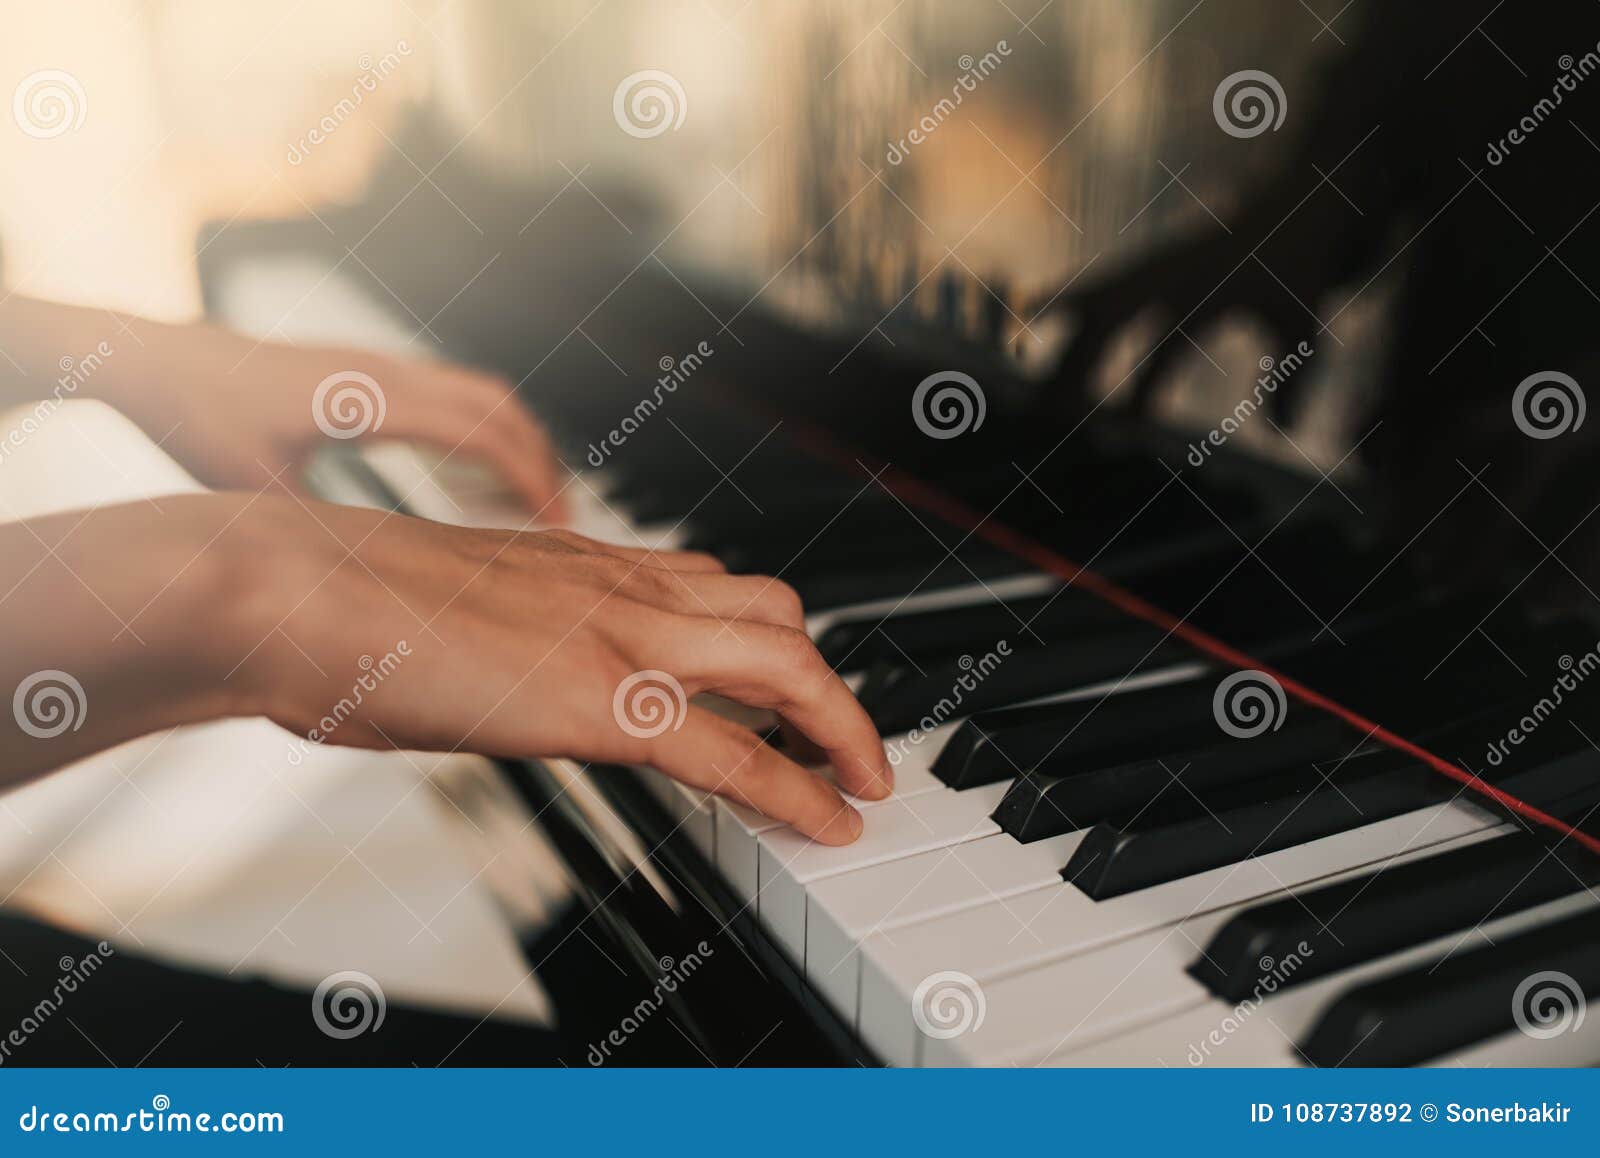 piano music pianist hands playing. musical instrument grand piano details with performer hand on white background